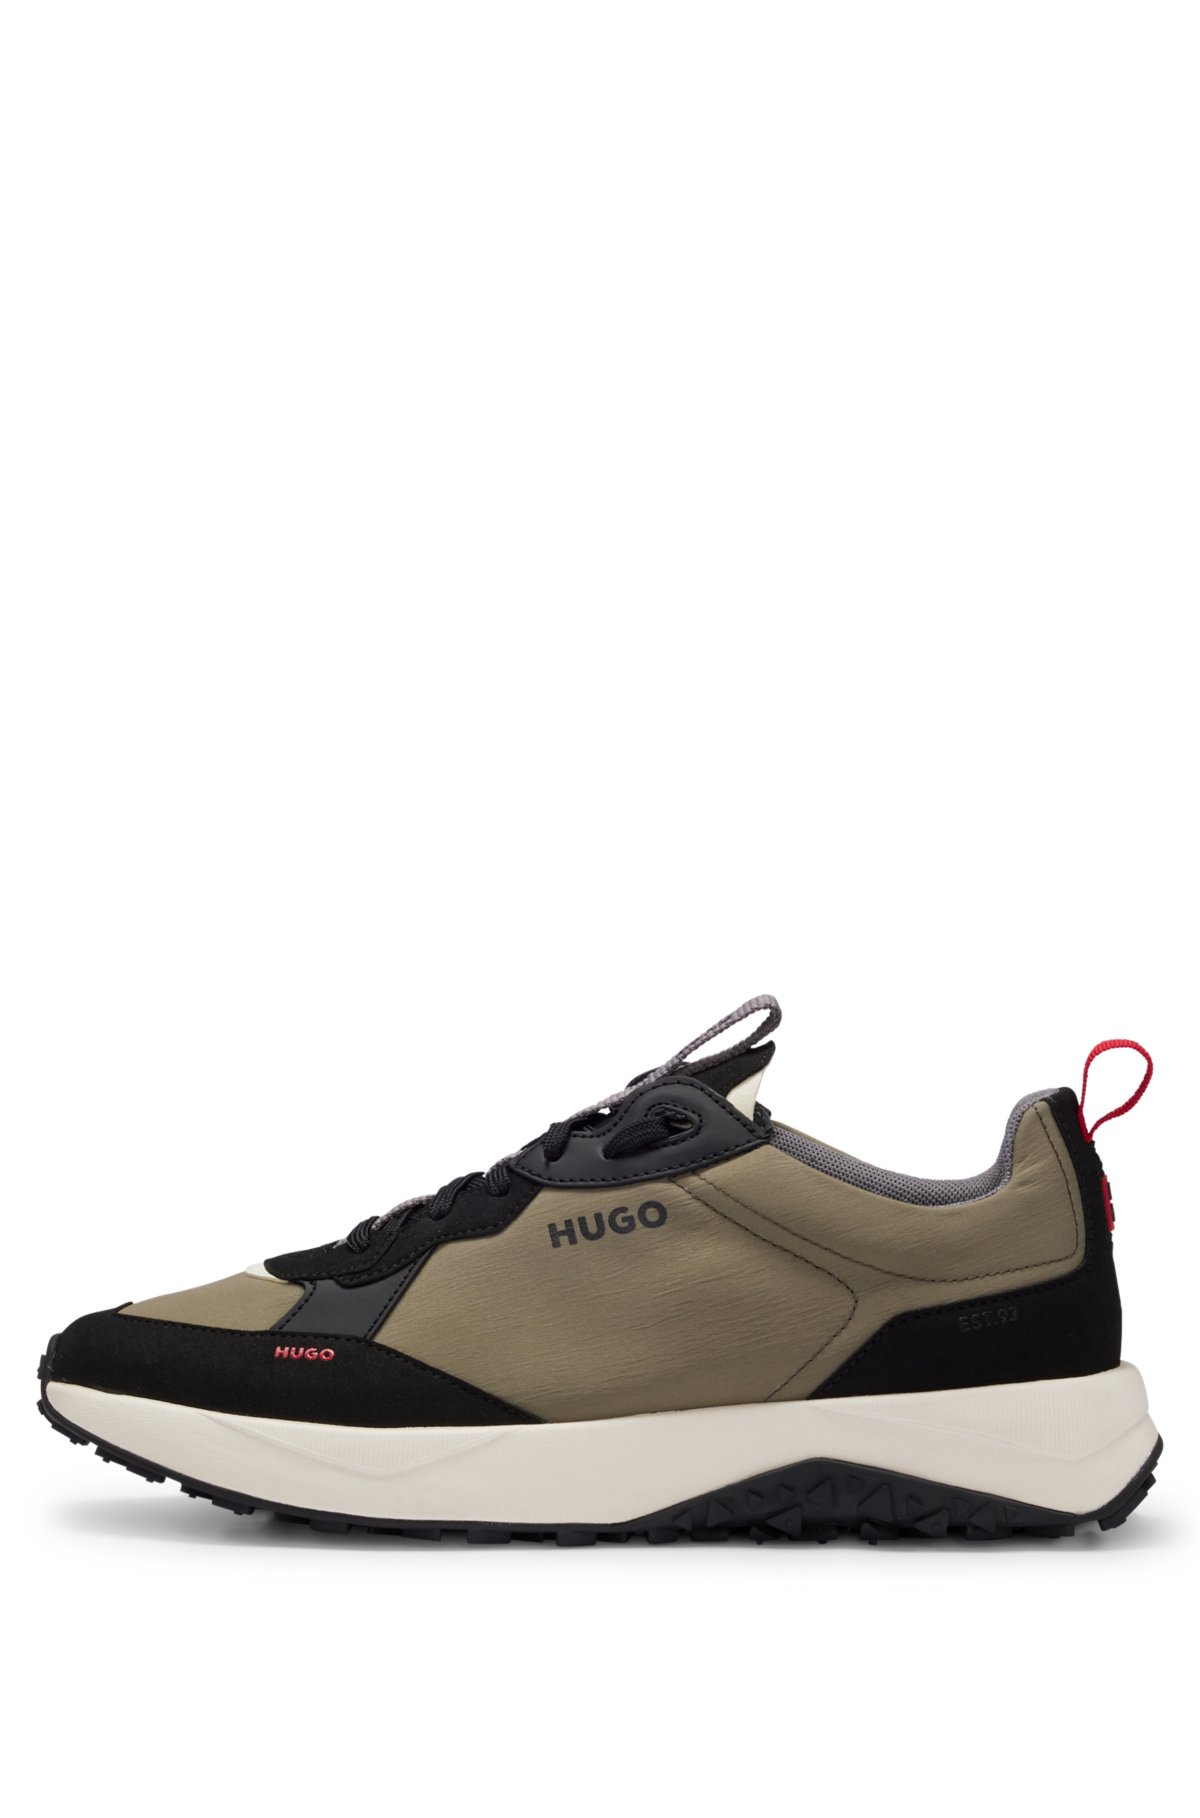 HUGO - Mixed-material trainers with suede and coated canvas